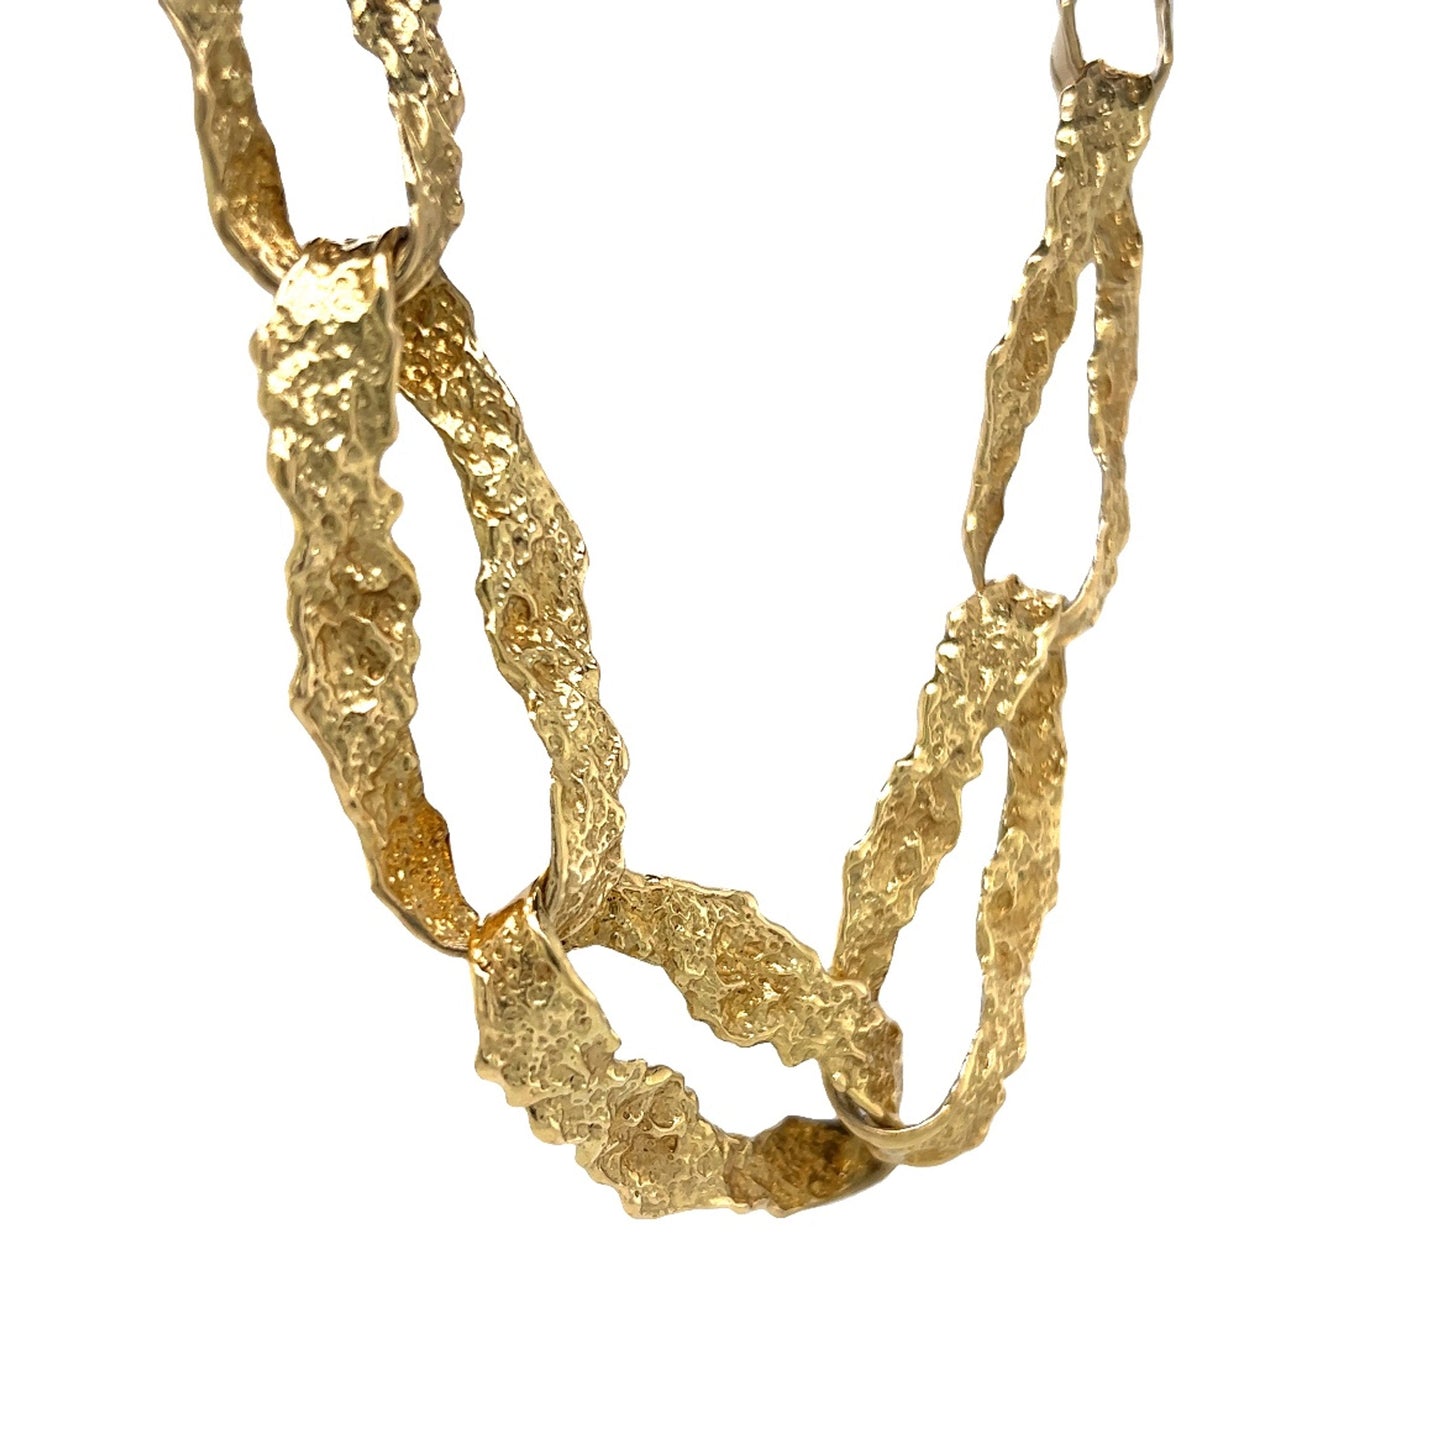 20" Textured Chain Necklace in 18k Yellow Gold